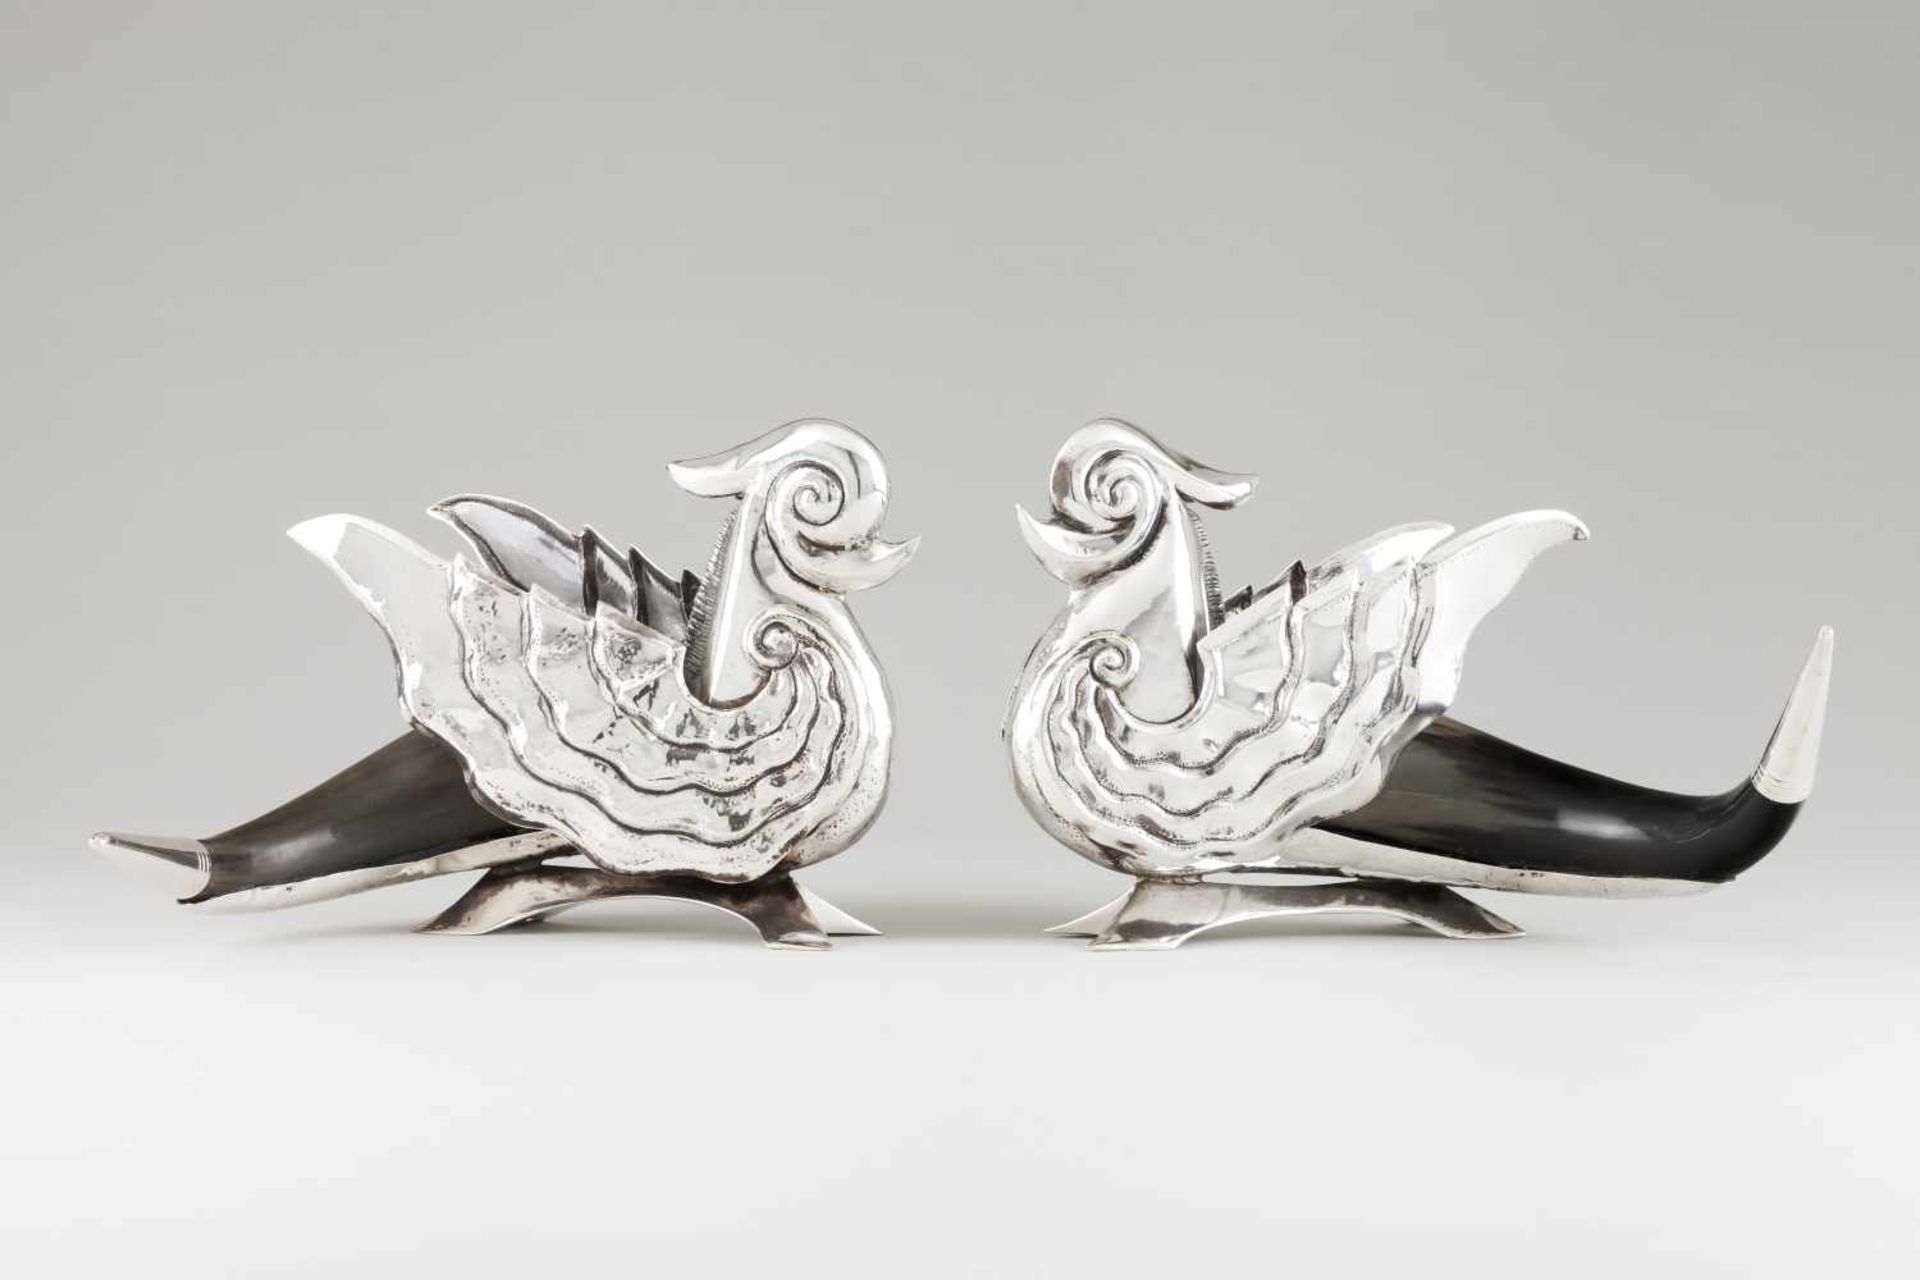 A pair of griffinsHorn and silverRaised, engraved and chiselled decorationOporto hallma